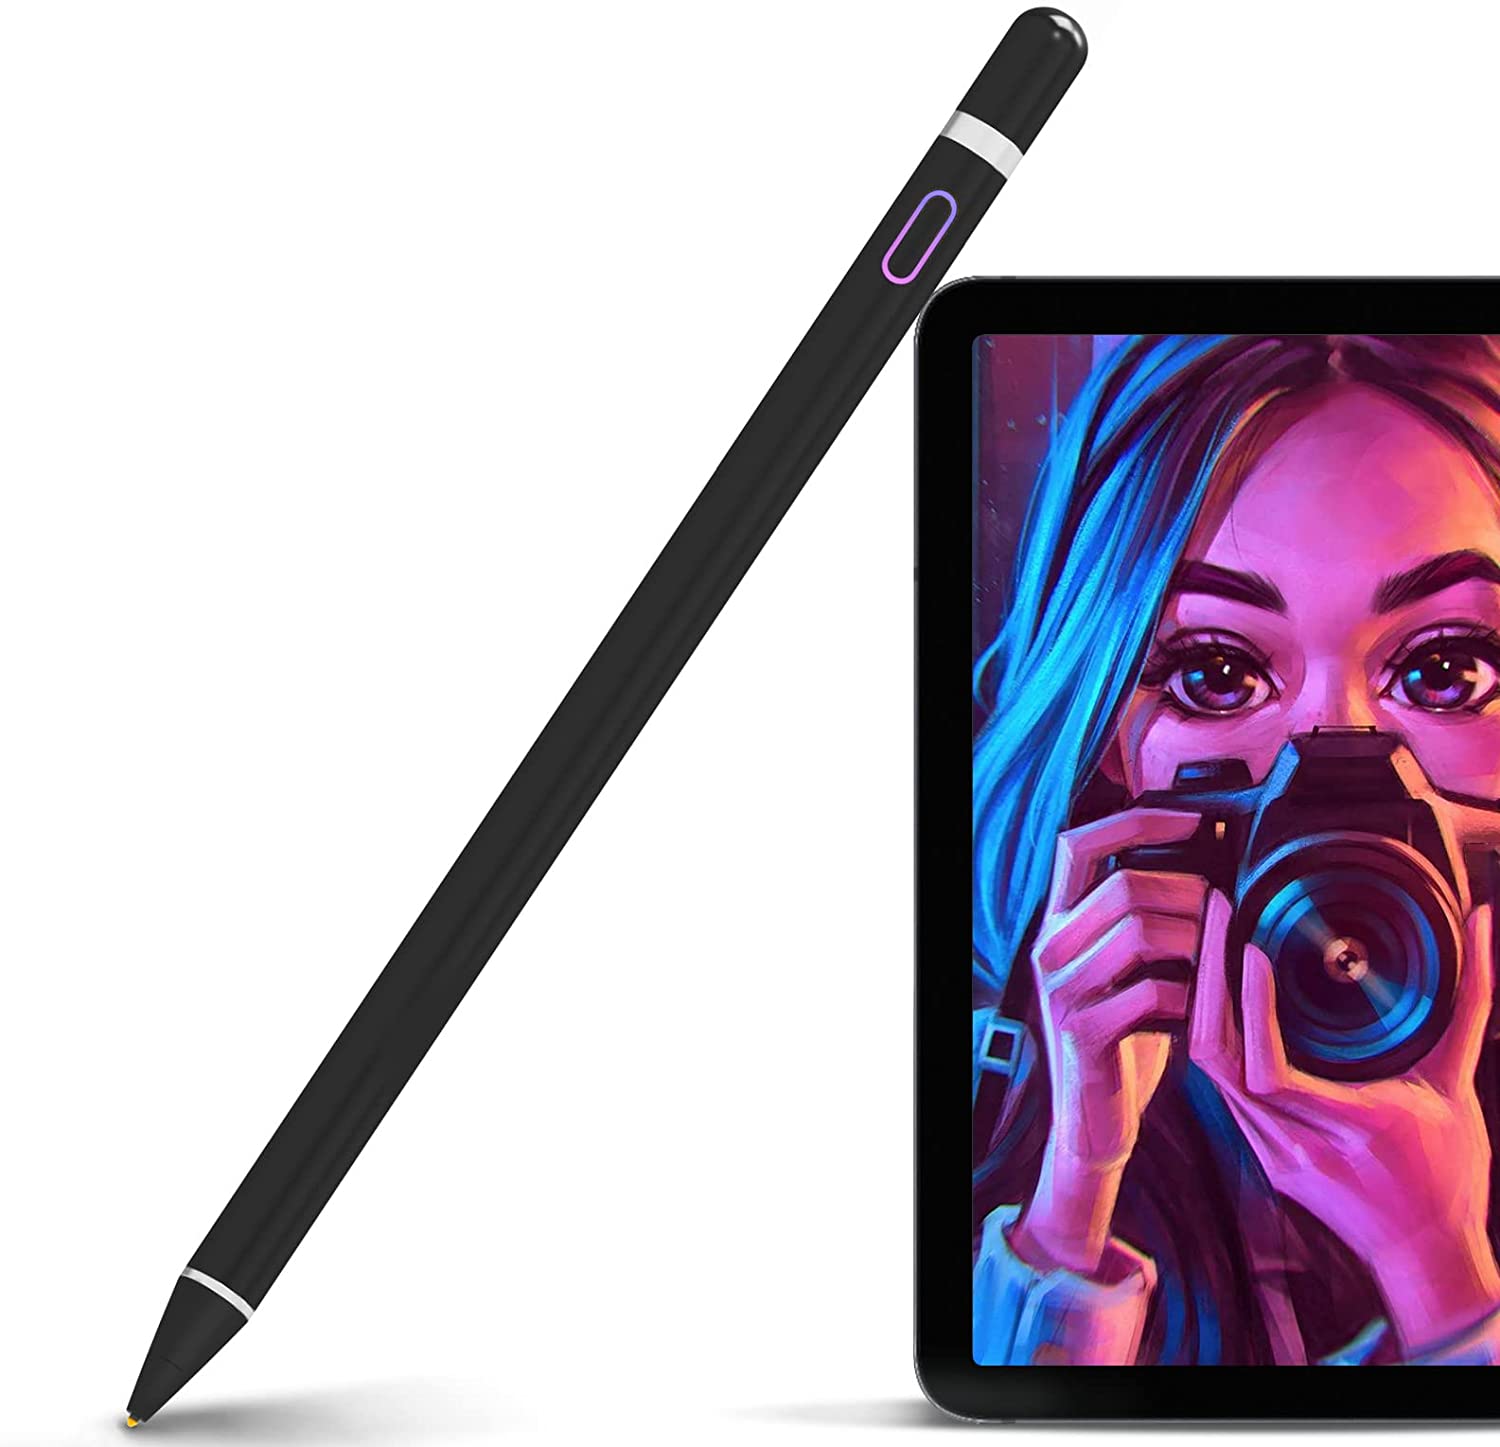 Best iPad stylus for drawing Dot Esports Best iPad Stylus for Drawing